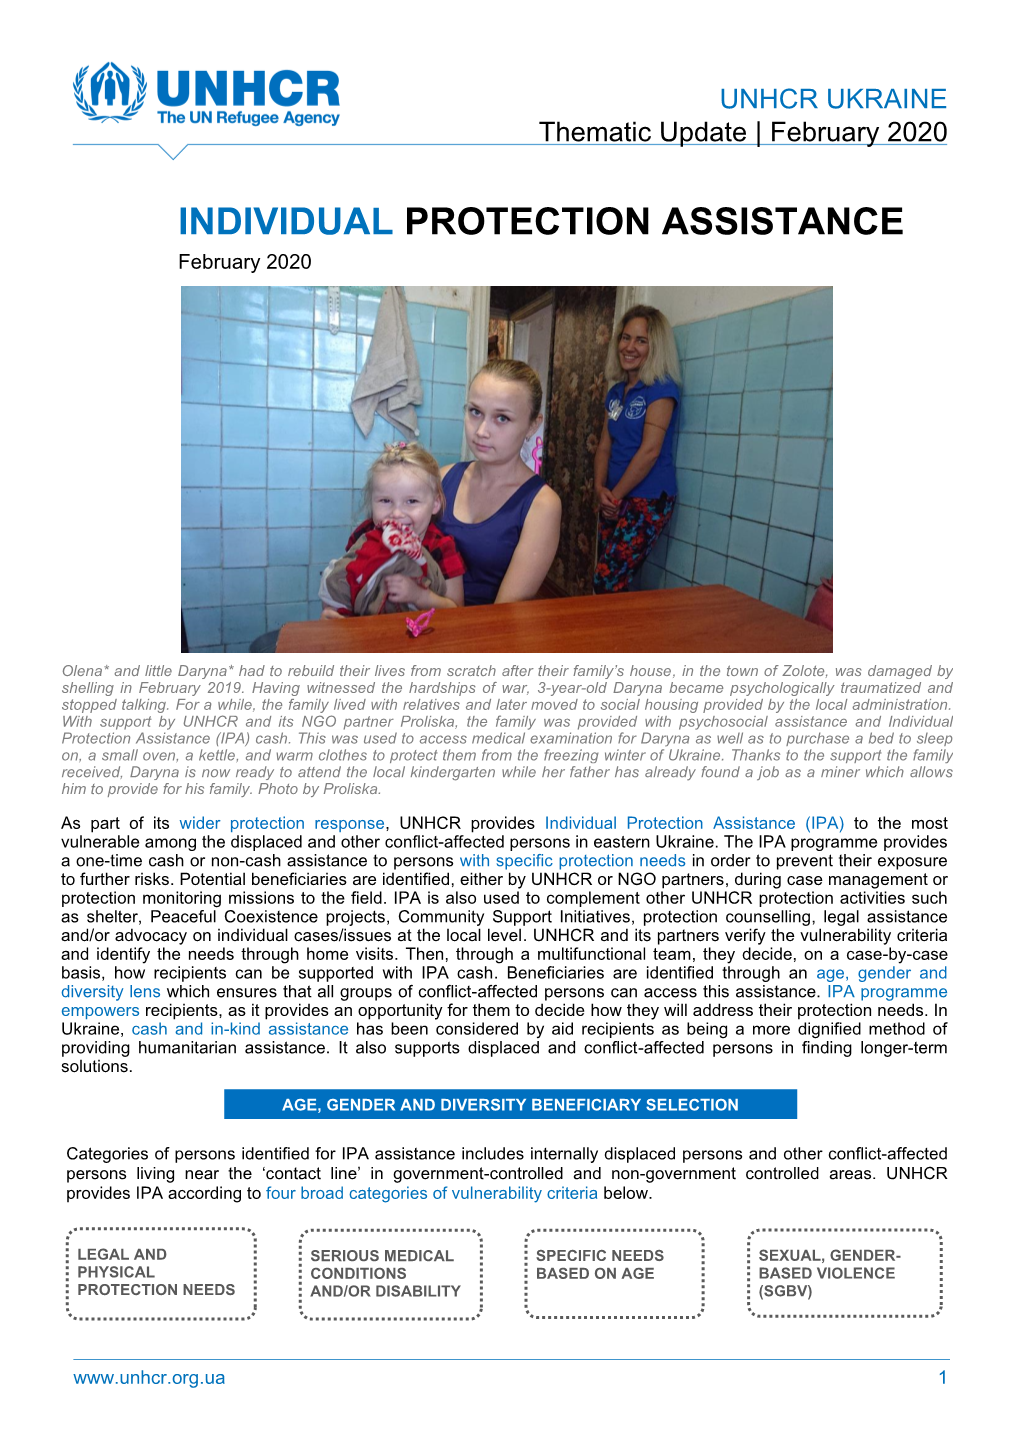 INDIVIDUAL PROTECTION ASSISTANCE February 2020